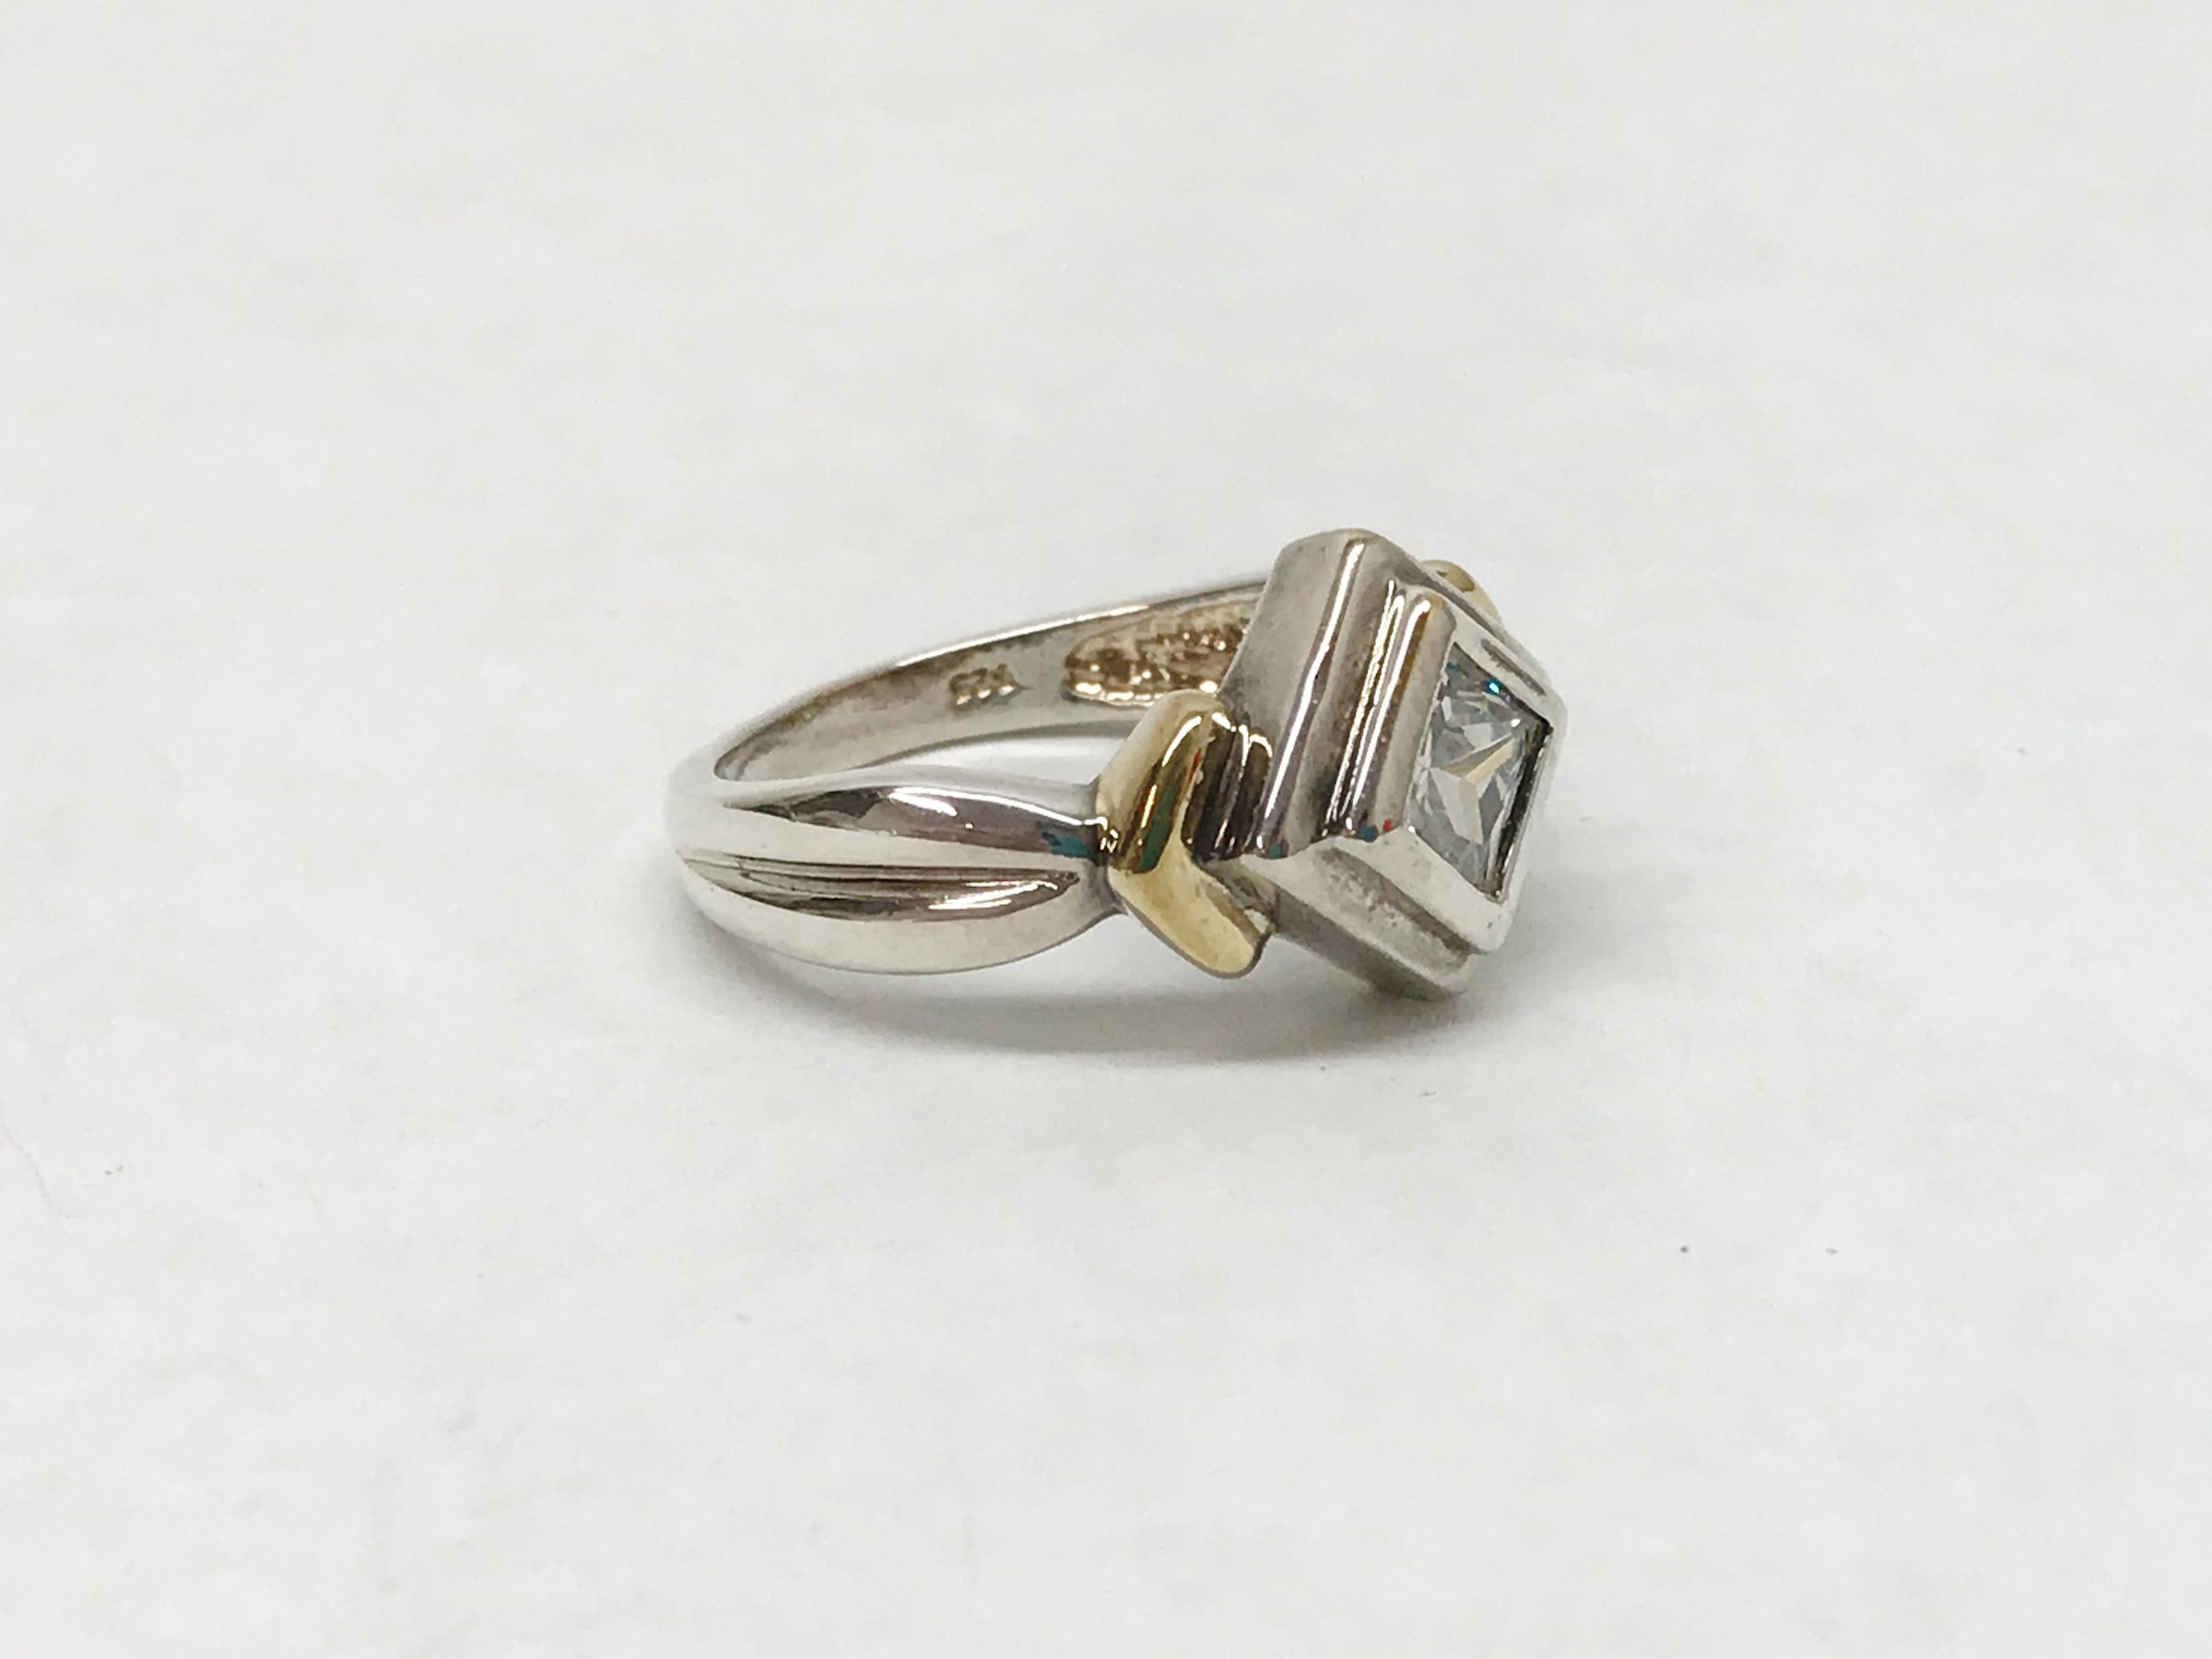 CW Charles Winston Gold Over Sterling Silver Diamond Shaped Ring